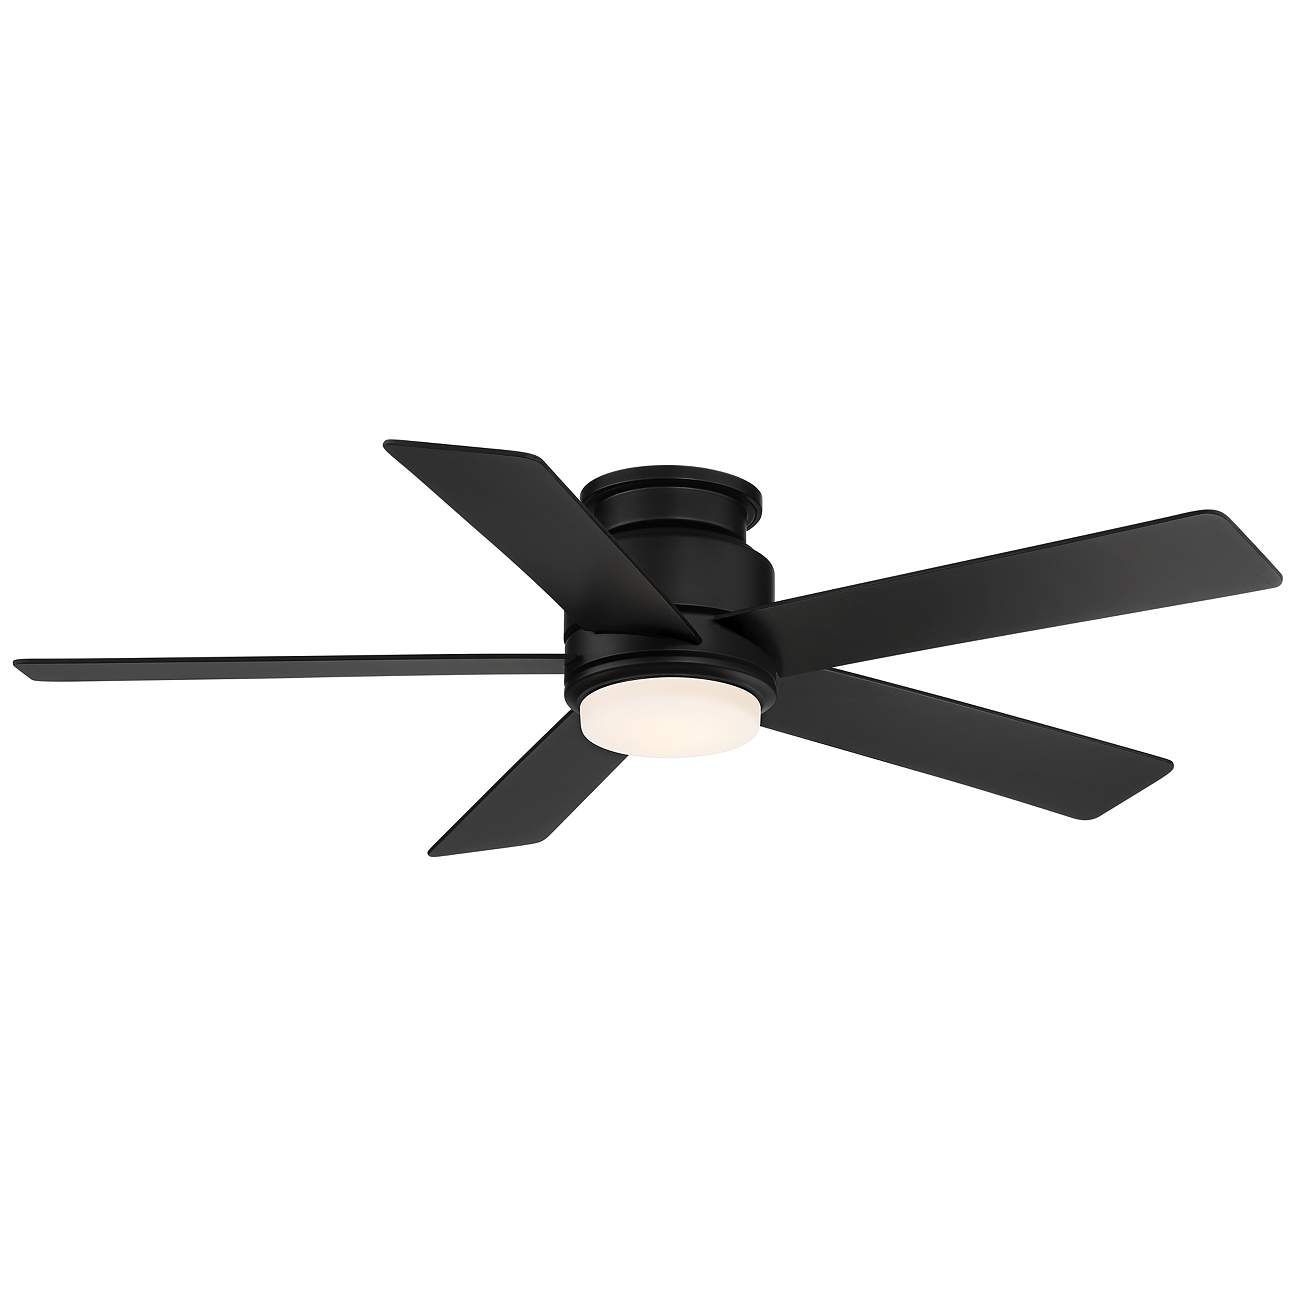 52" Casa Vieja Grand Palm Black Damp Rated LED Hugger Fan with Remote - #402T0 | Lamps Plus | Lamps Plus